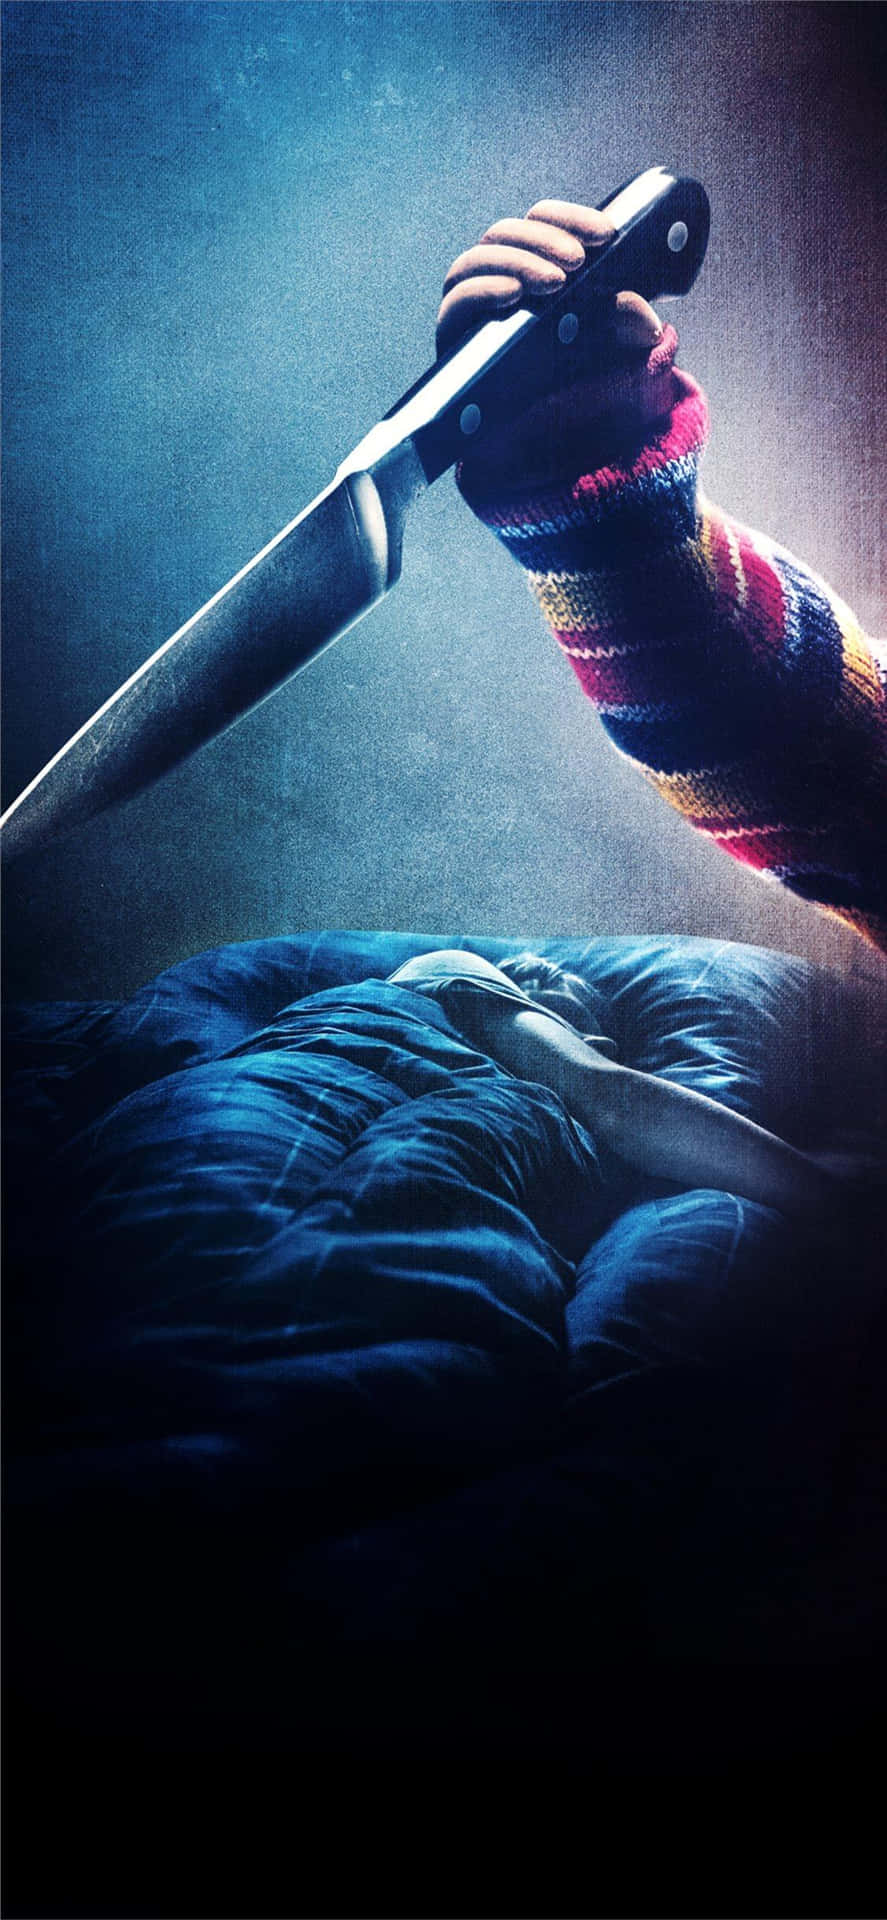 Unlock the horror with this iPhone Wallpaper